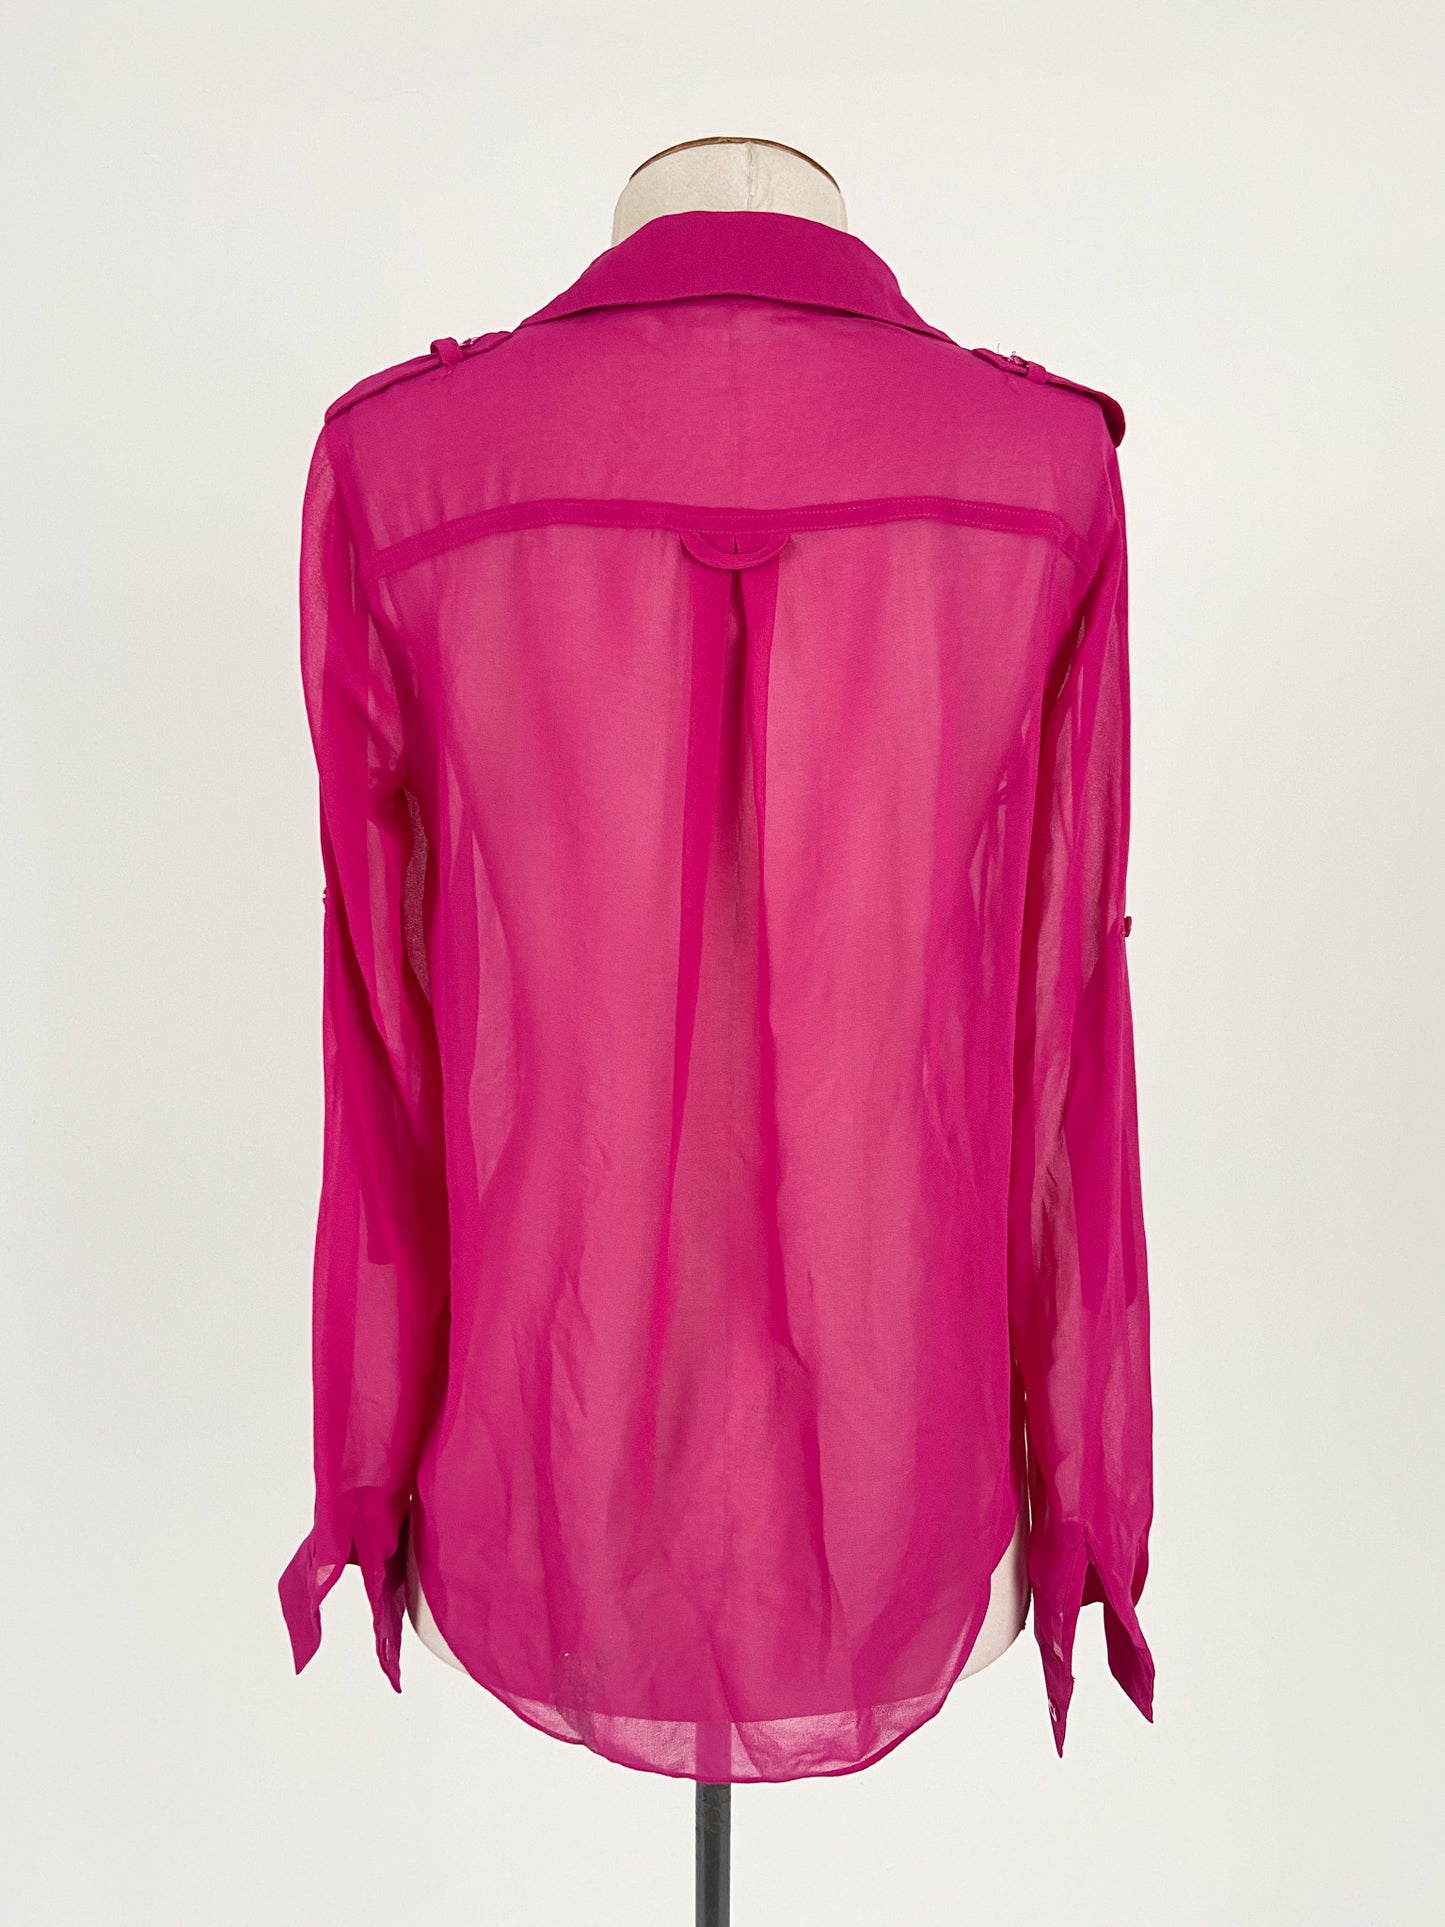 Forever New | Pink Casual/Workwear Top | Size 6